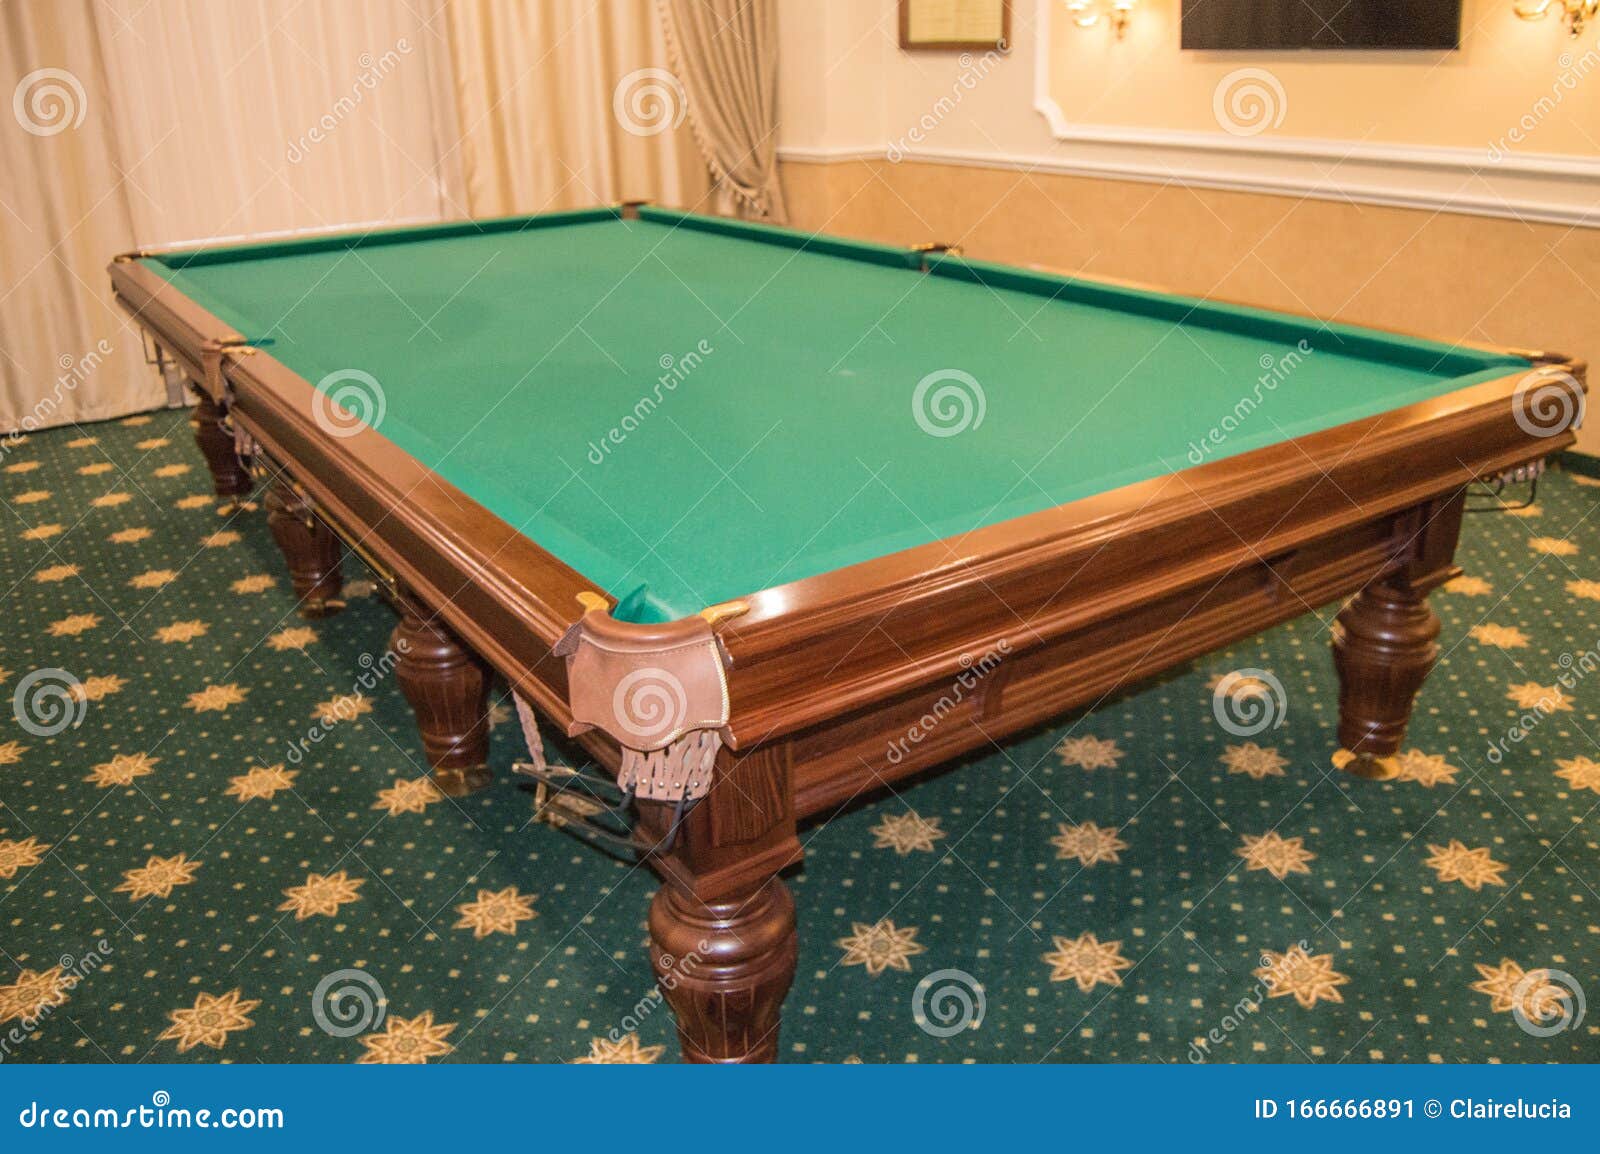 Billiard Table With Green Baize Stands In A Luxurious Living Room